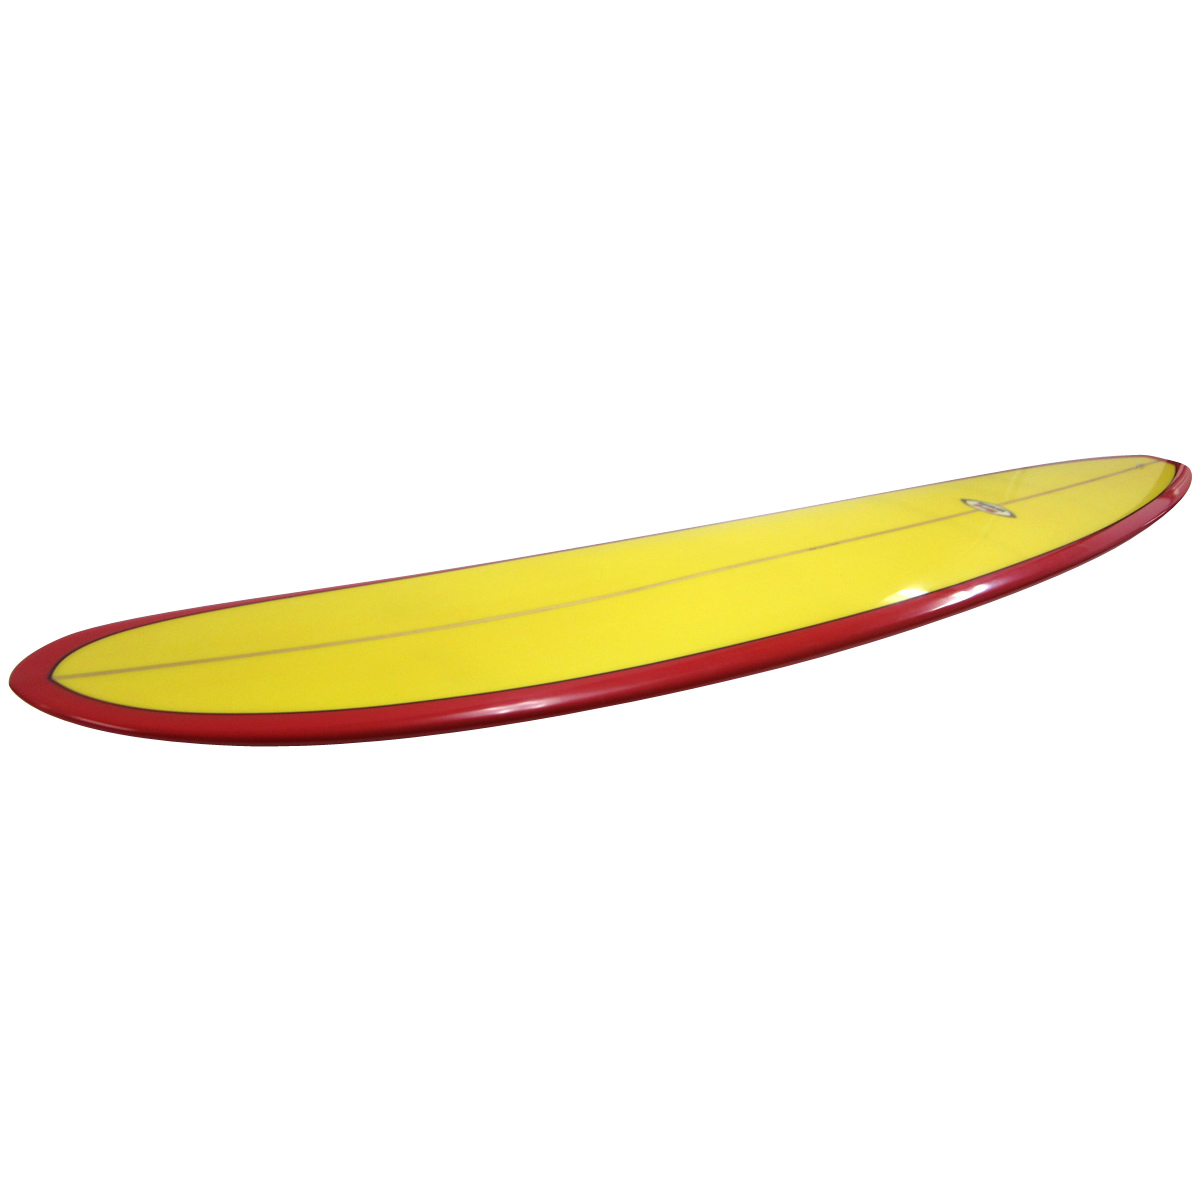 BING / Light Weight Classic 10`0 Step Deck Shaped by Mike Eaton